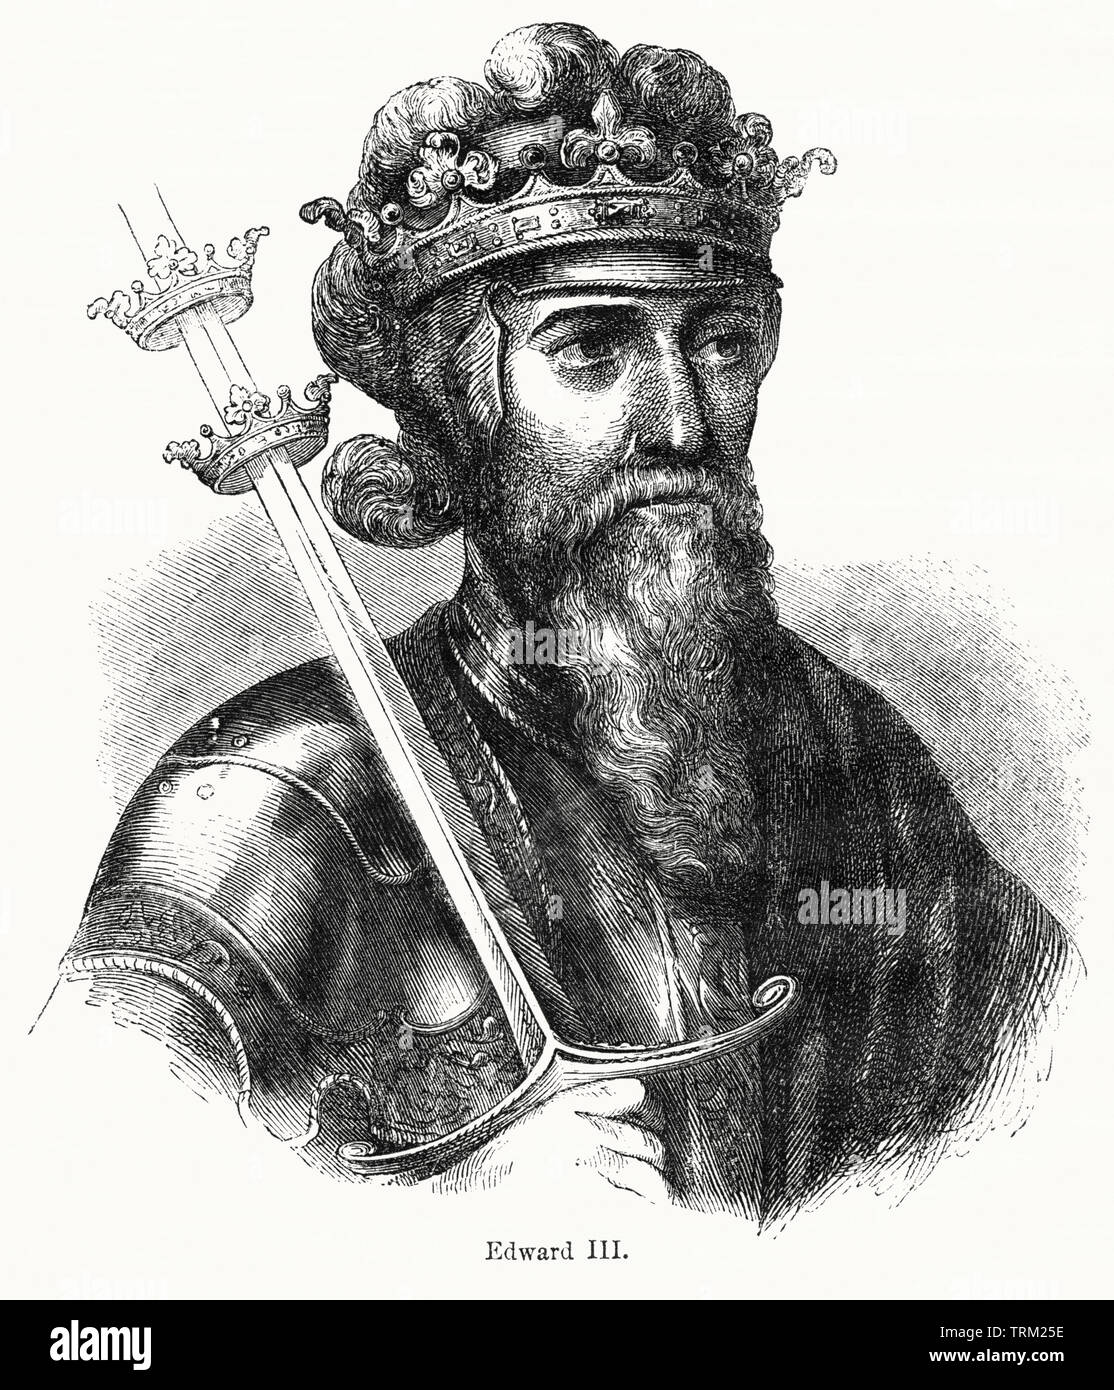 Edward III, King of England 1327-77, Illustration from John Cassell's Illustrated History of England, Vol. I from the earliest period to the reign of Edward the Fourth, Cassell, Petter and Galpin, 1857 Stock Photo